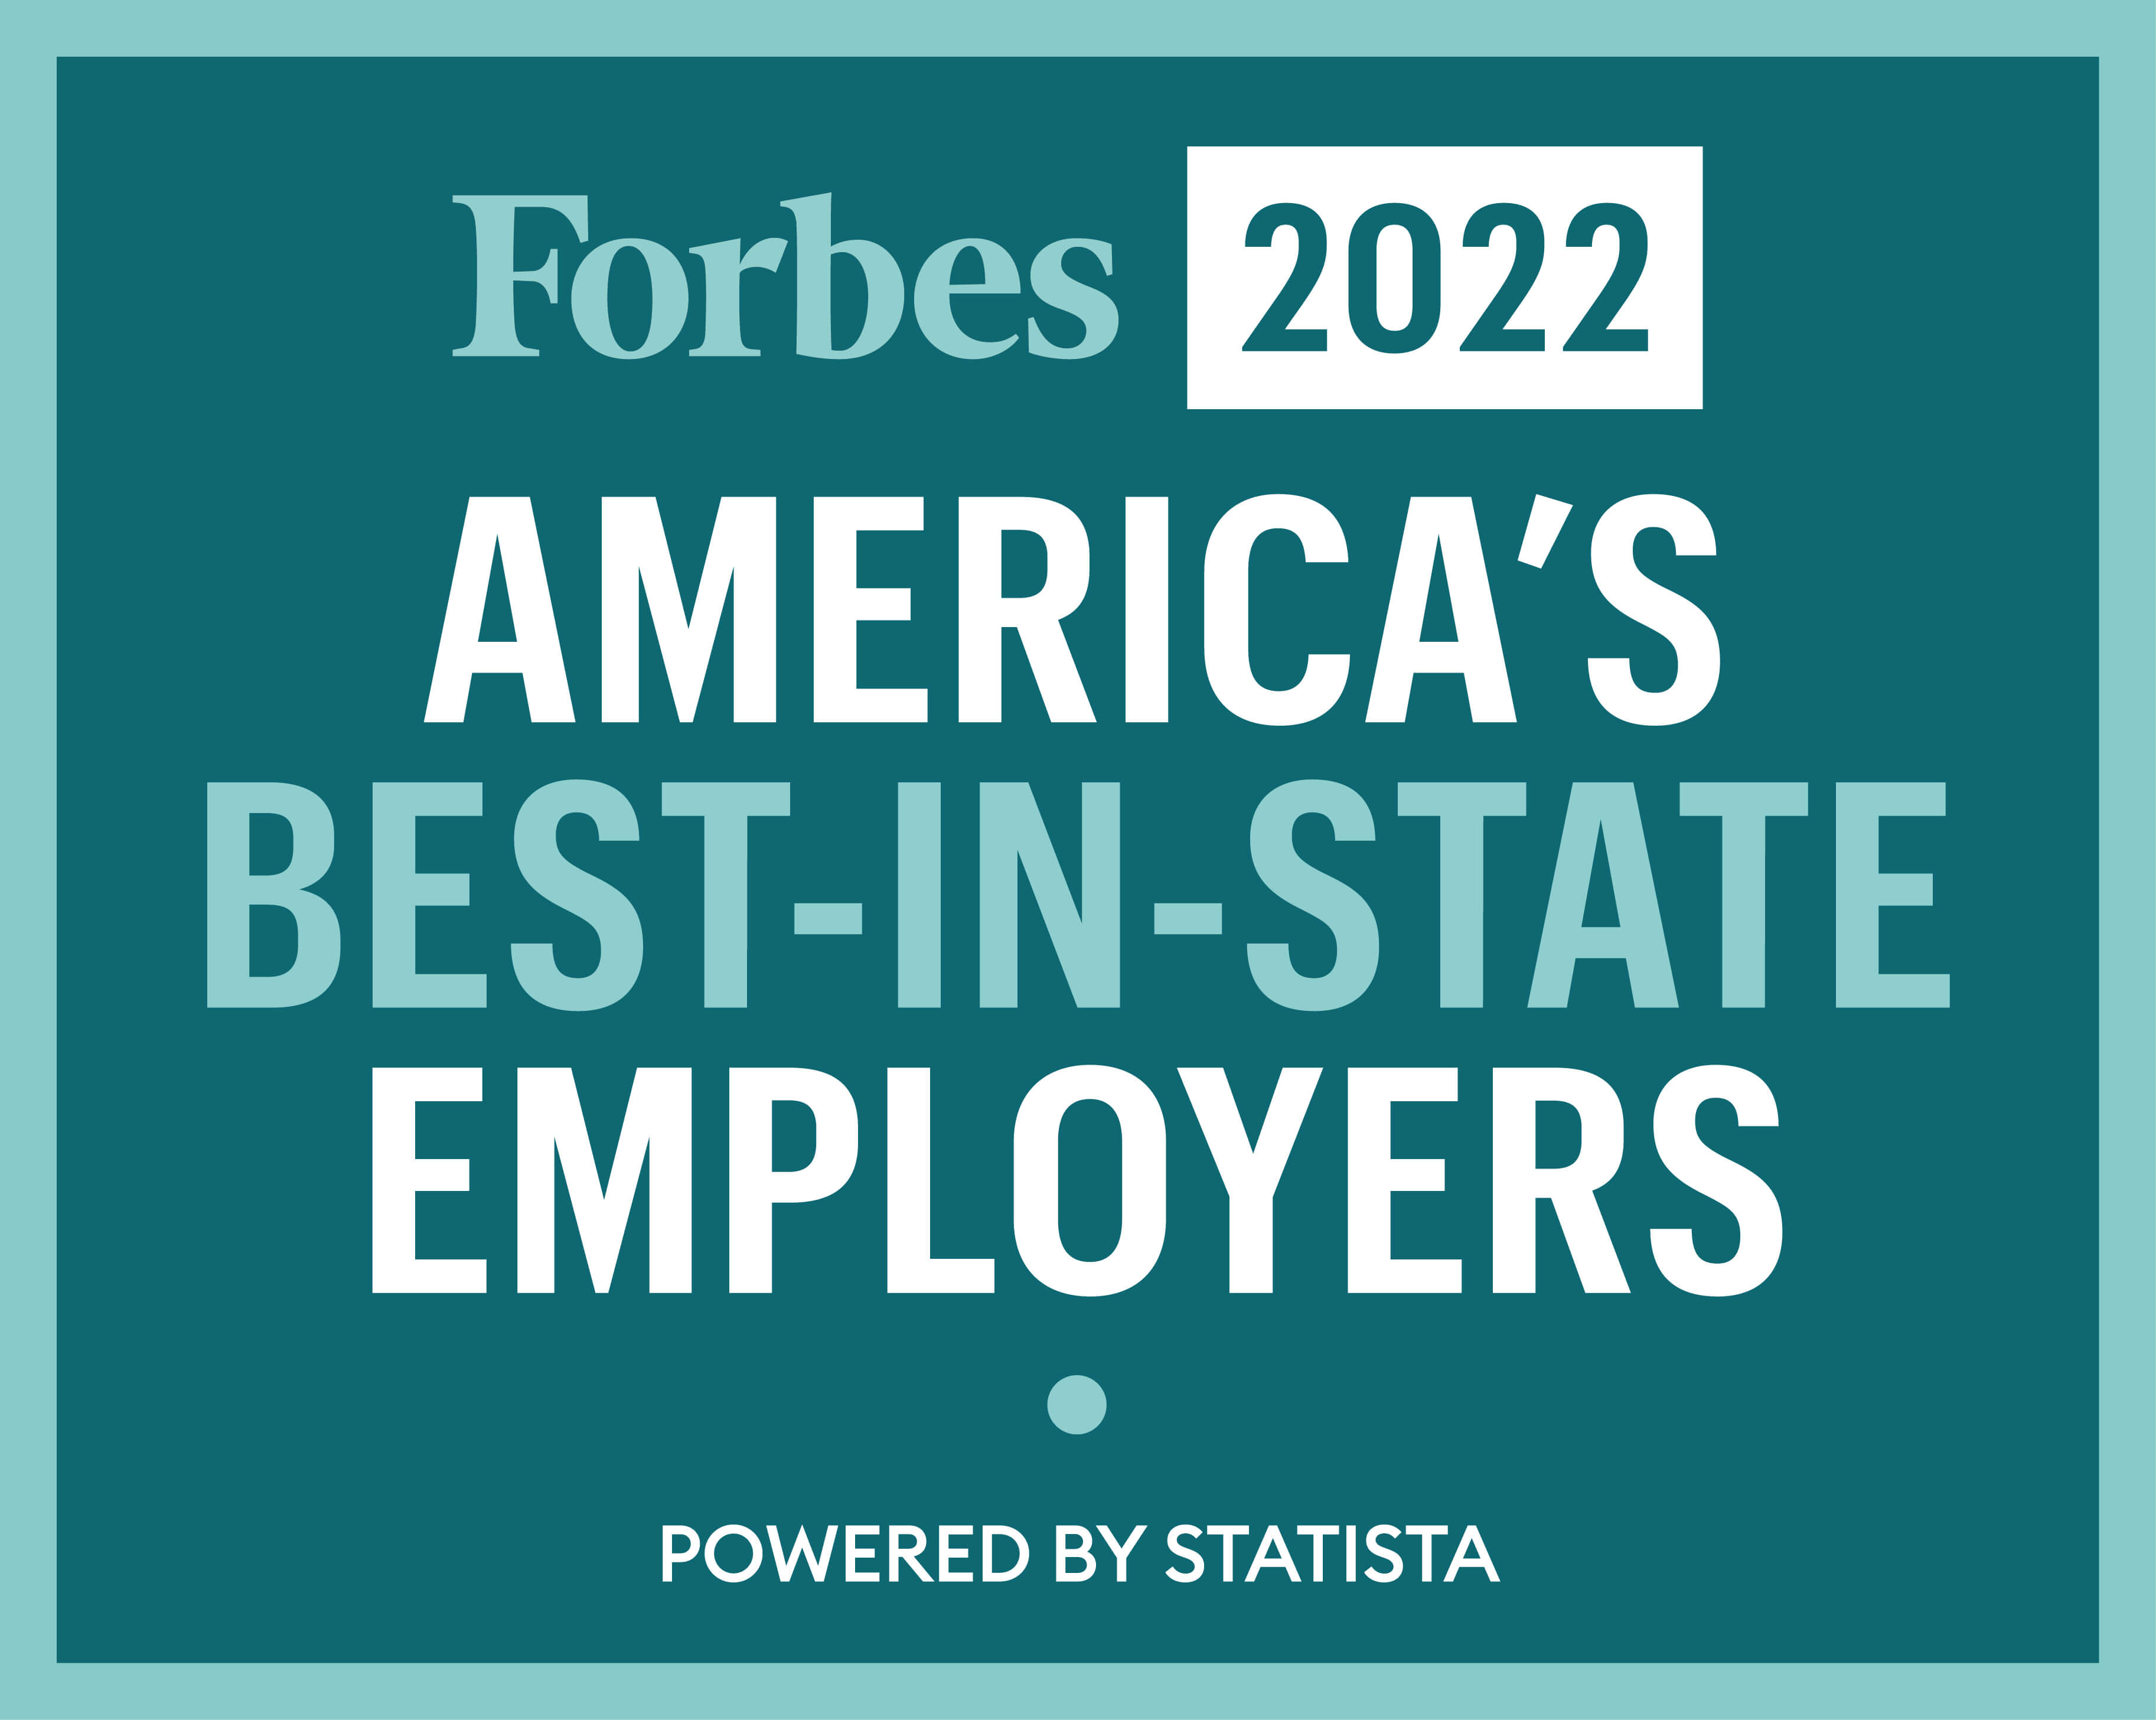 Forbes Best-in-state employer 2022